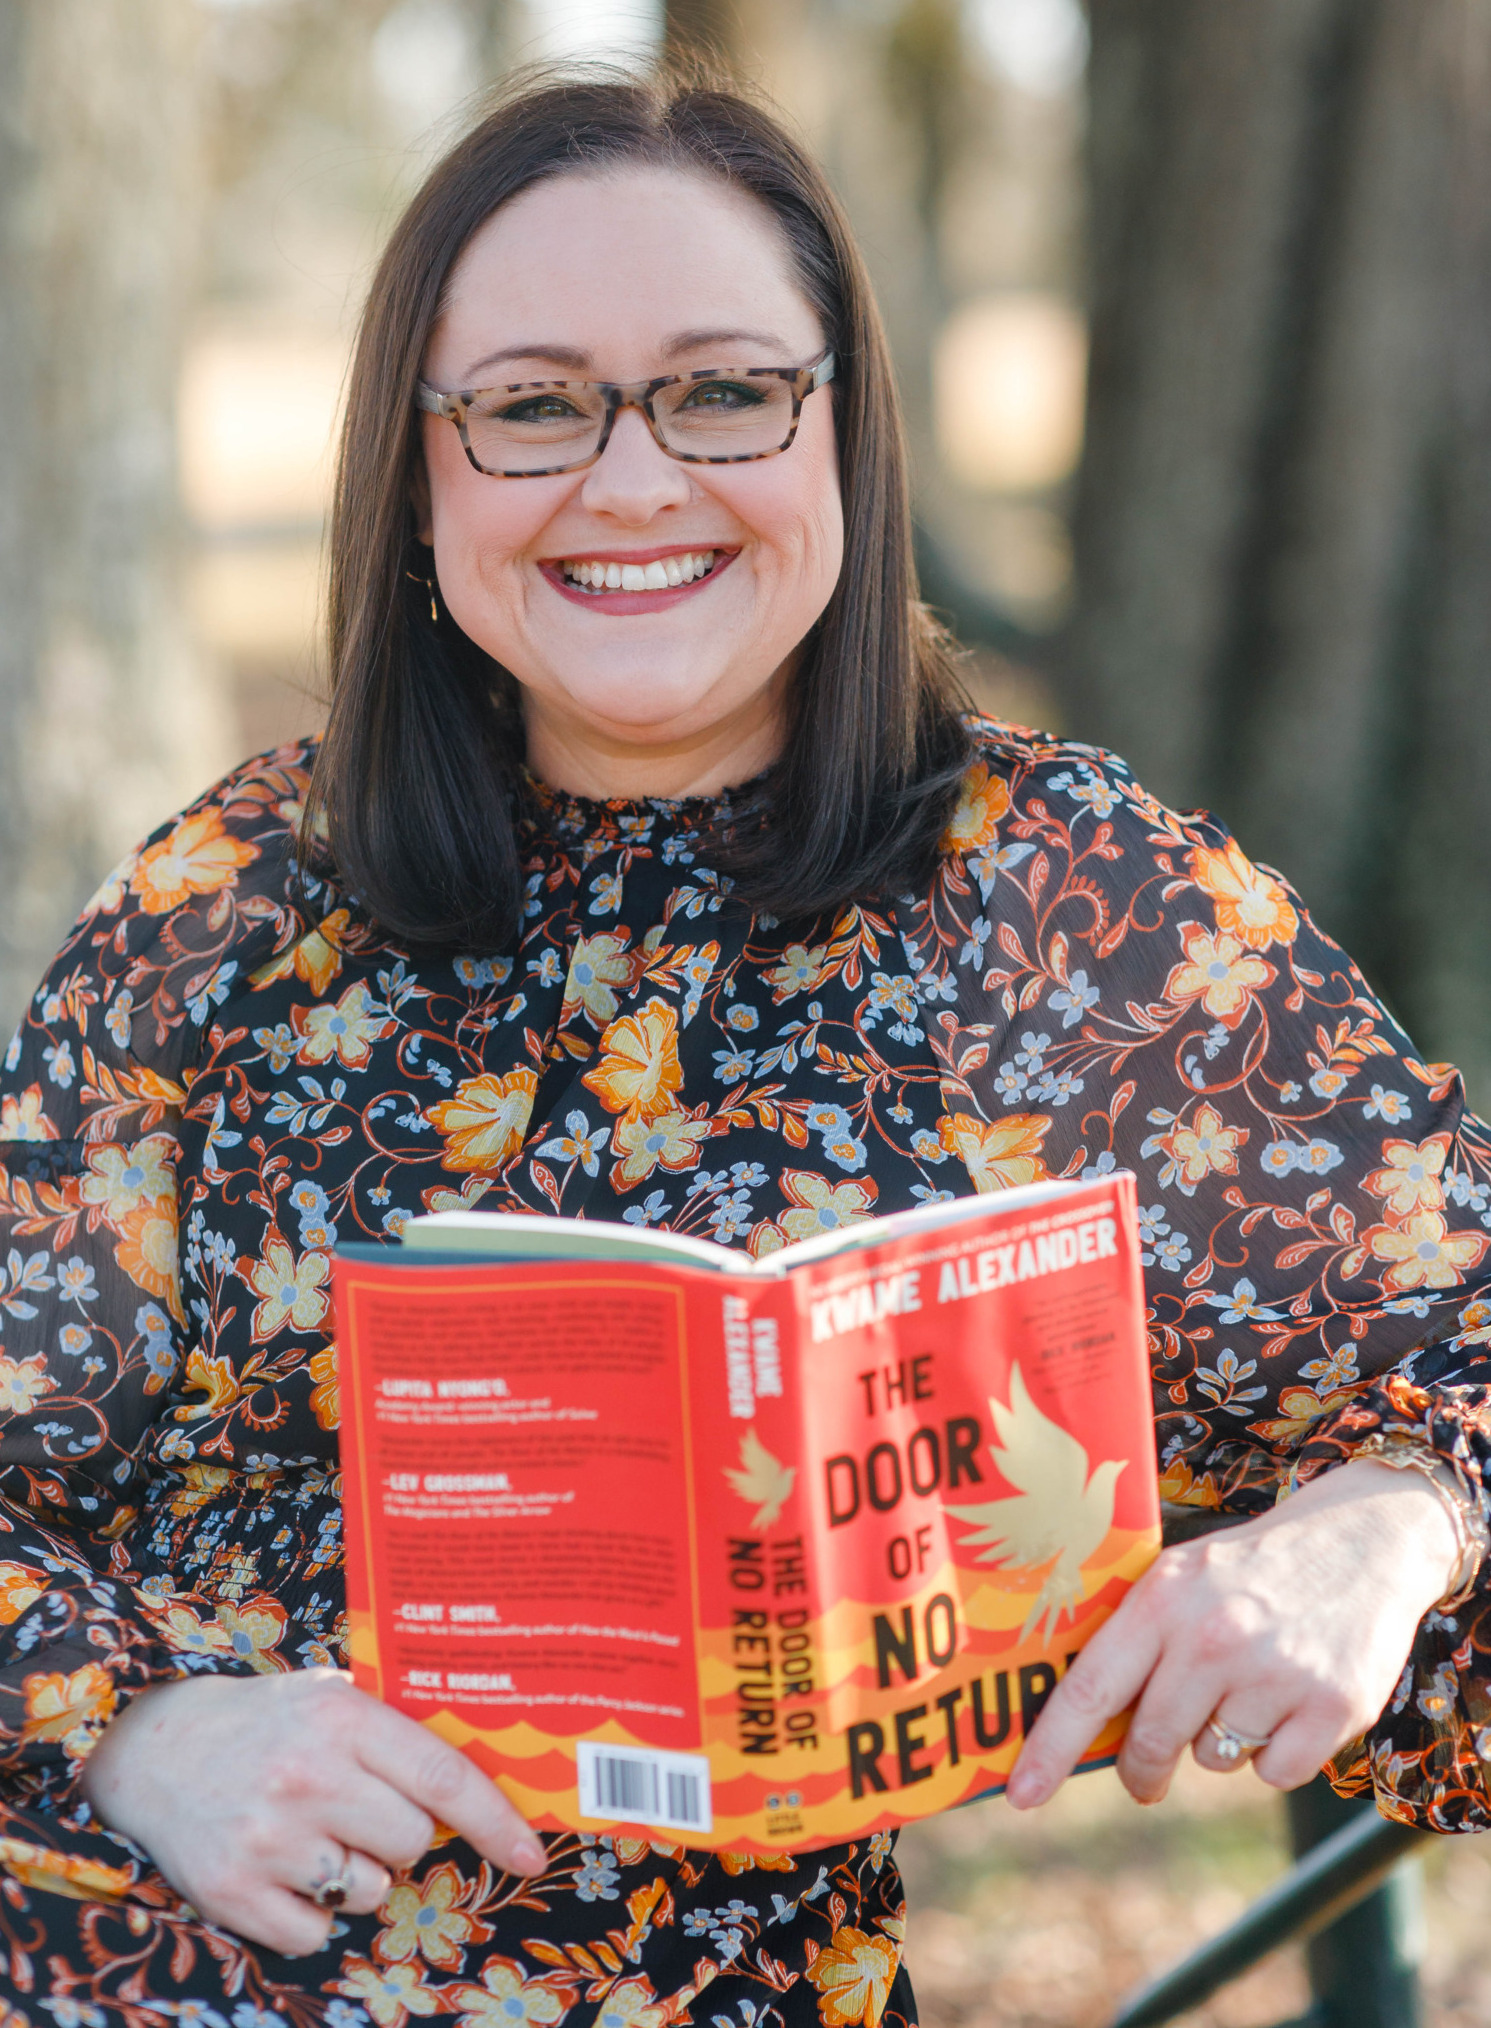 Book bans: Dark-haired woman with glasses in dark floral top smiles into camera while holding a book open with its red cover facing the camera